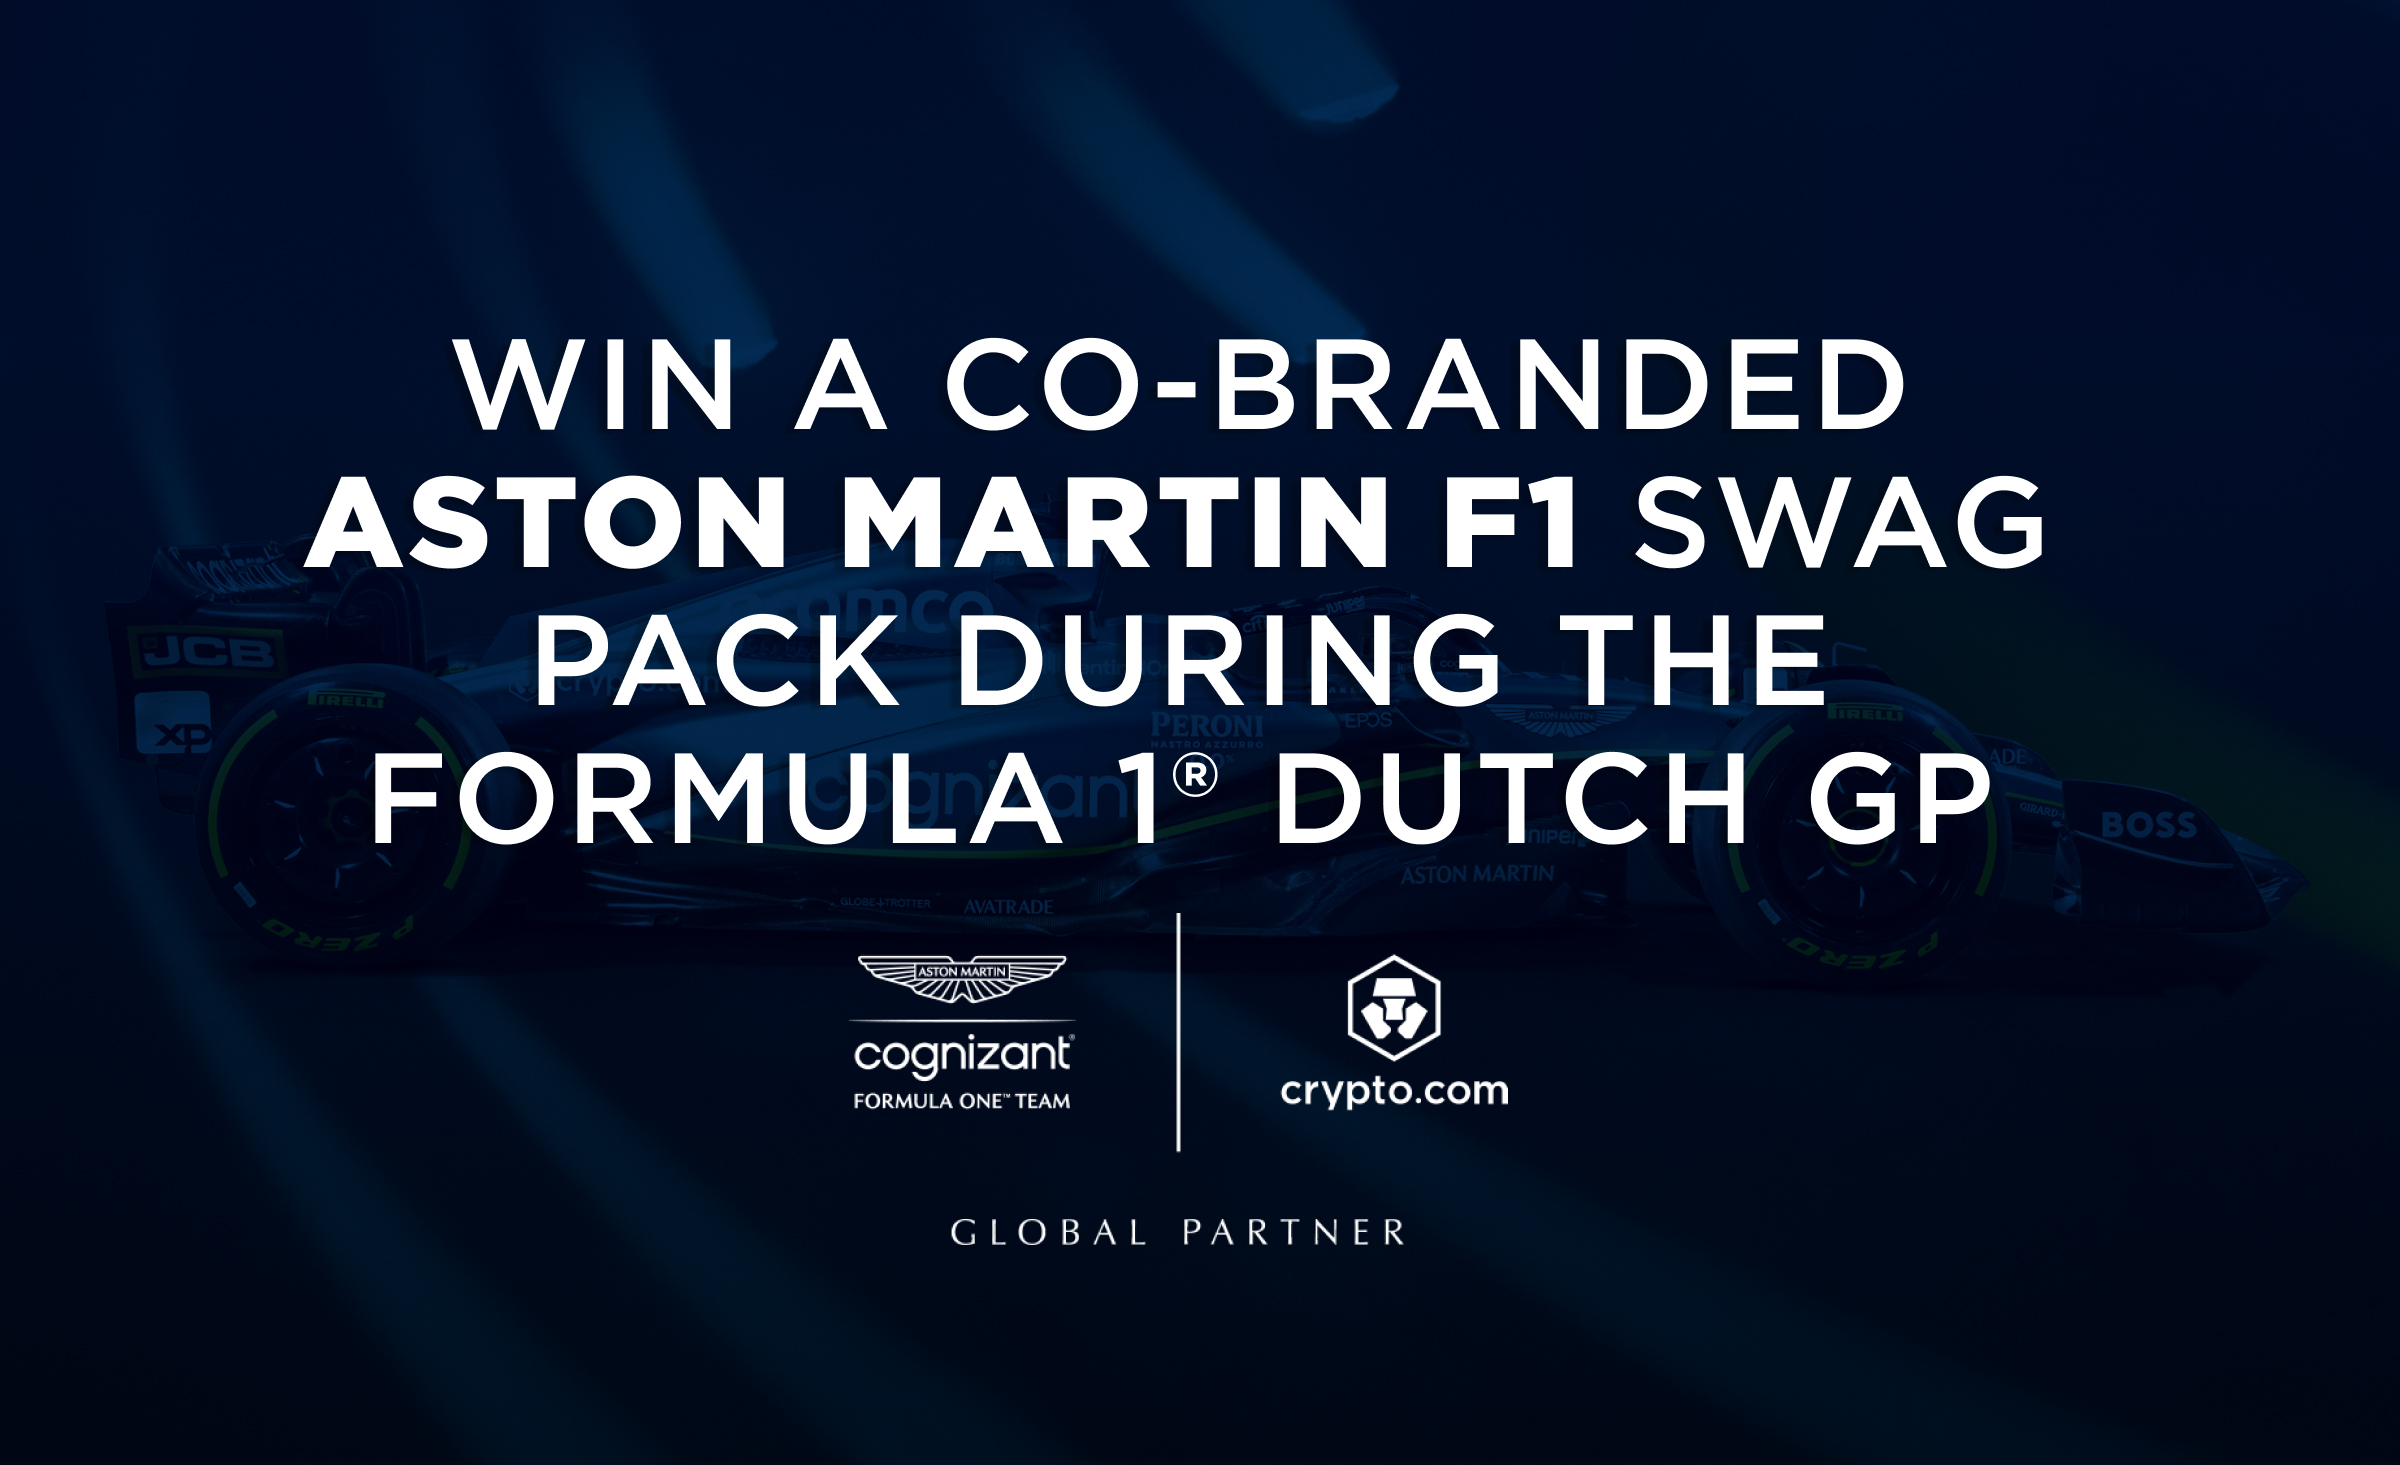 Win a Co-Branded Aston Martin F1 Swag Pack During the Formula 1 Dutch GP